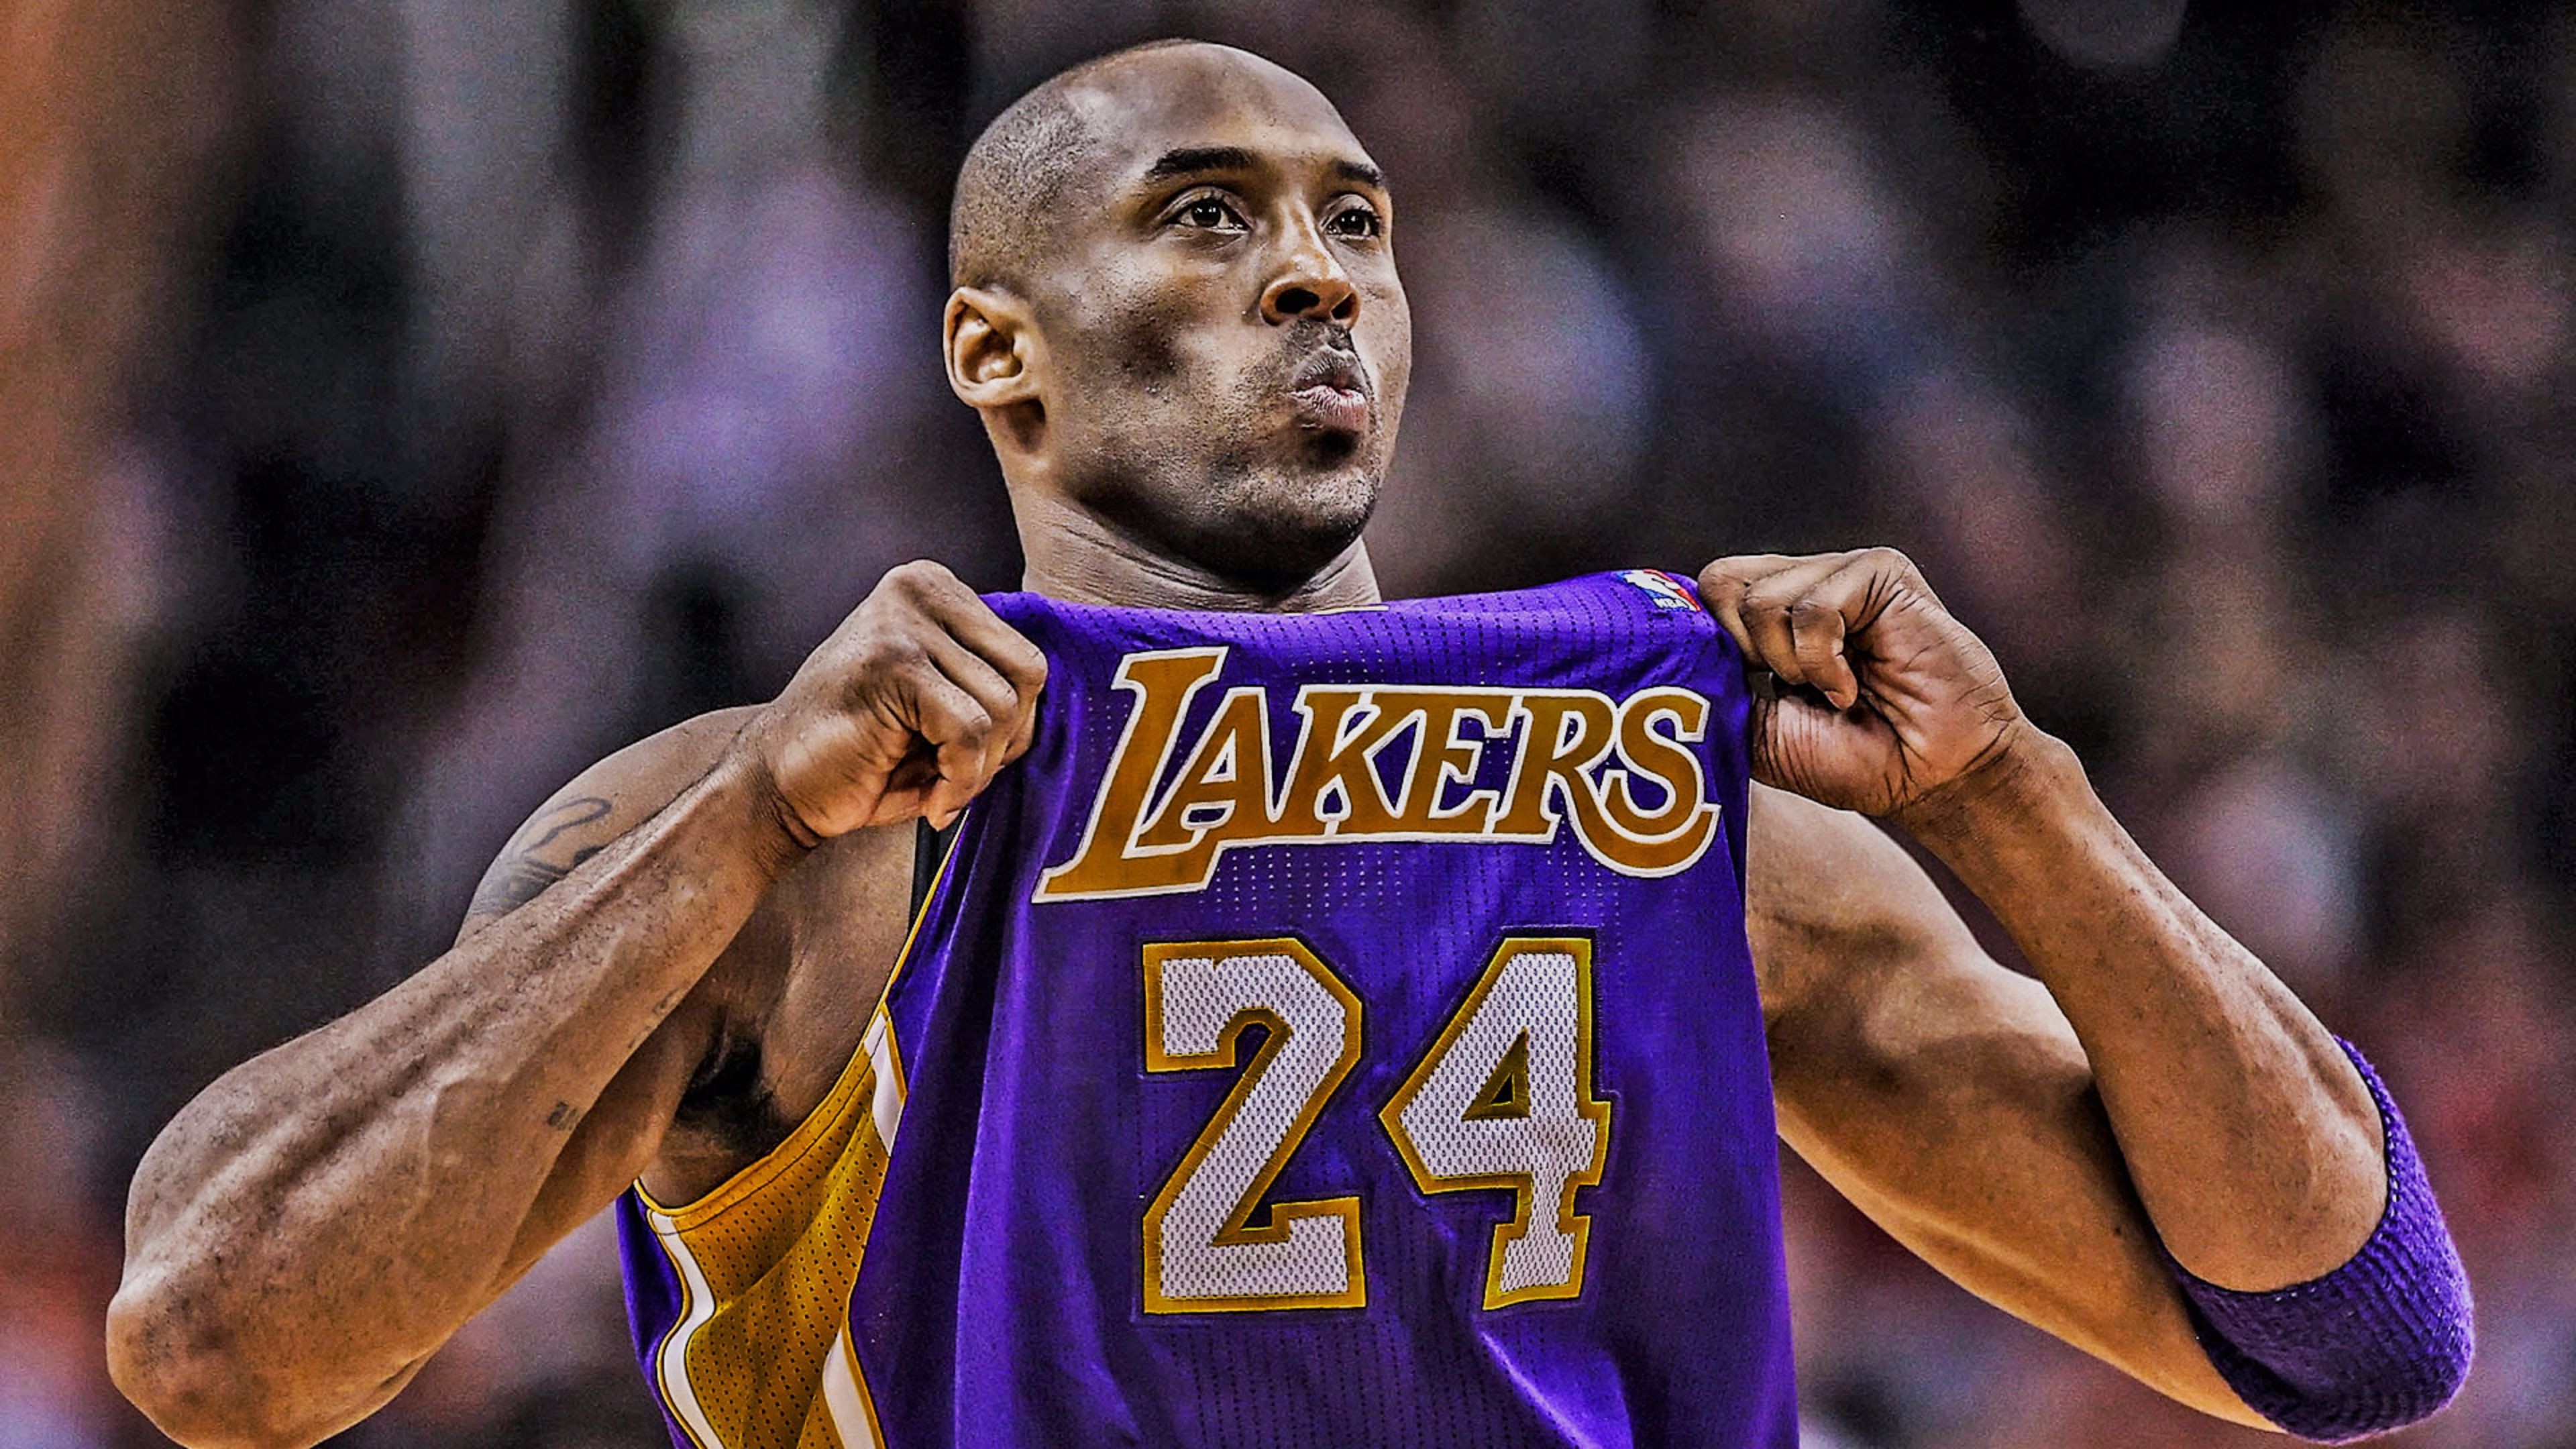 3840x2160 new kobe bryant 4k wallpapers desktop wallpapers 4k high definition windows  10 mac apple colourful images backgrounds free 3840Ã2160 Wallpaper HD